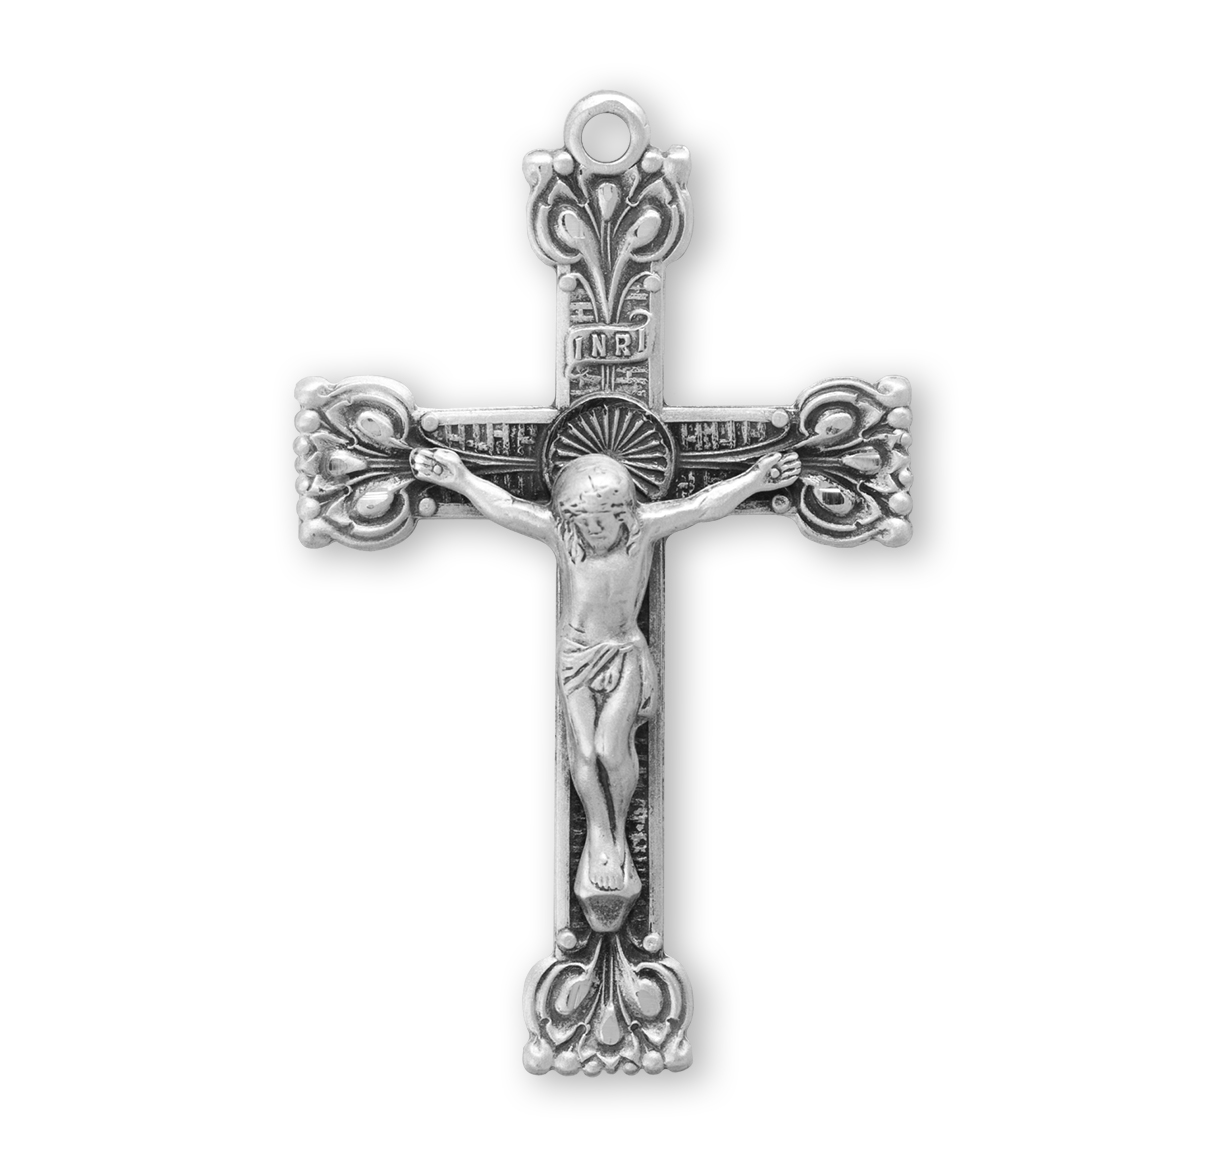 25mm Rosary Cross Charms, Rhodium Plated, Pack of 5